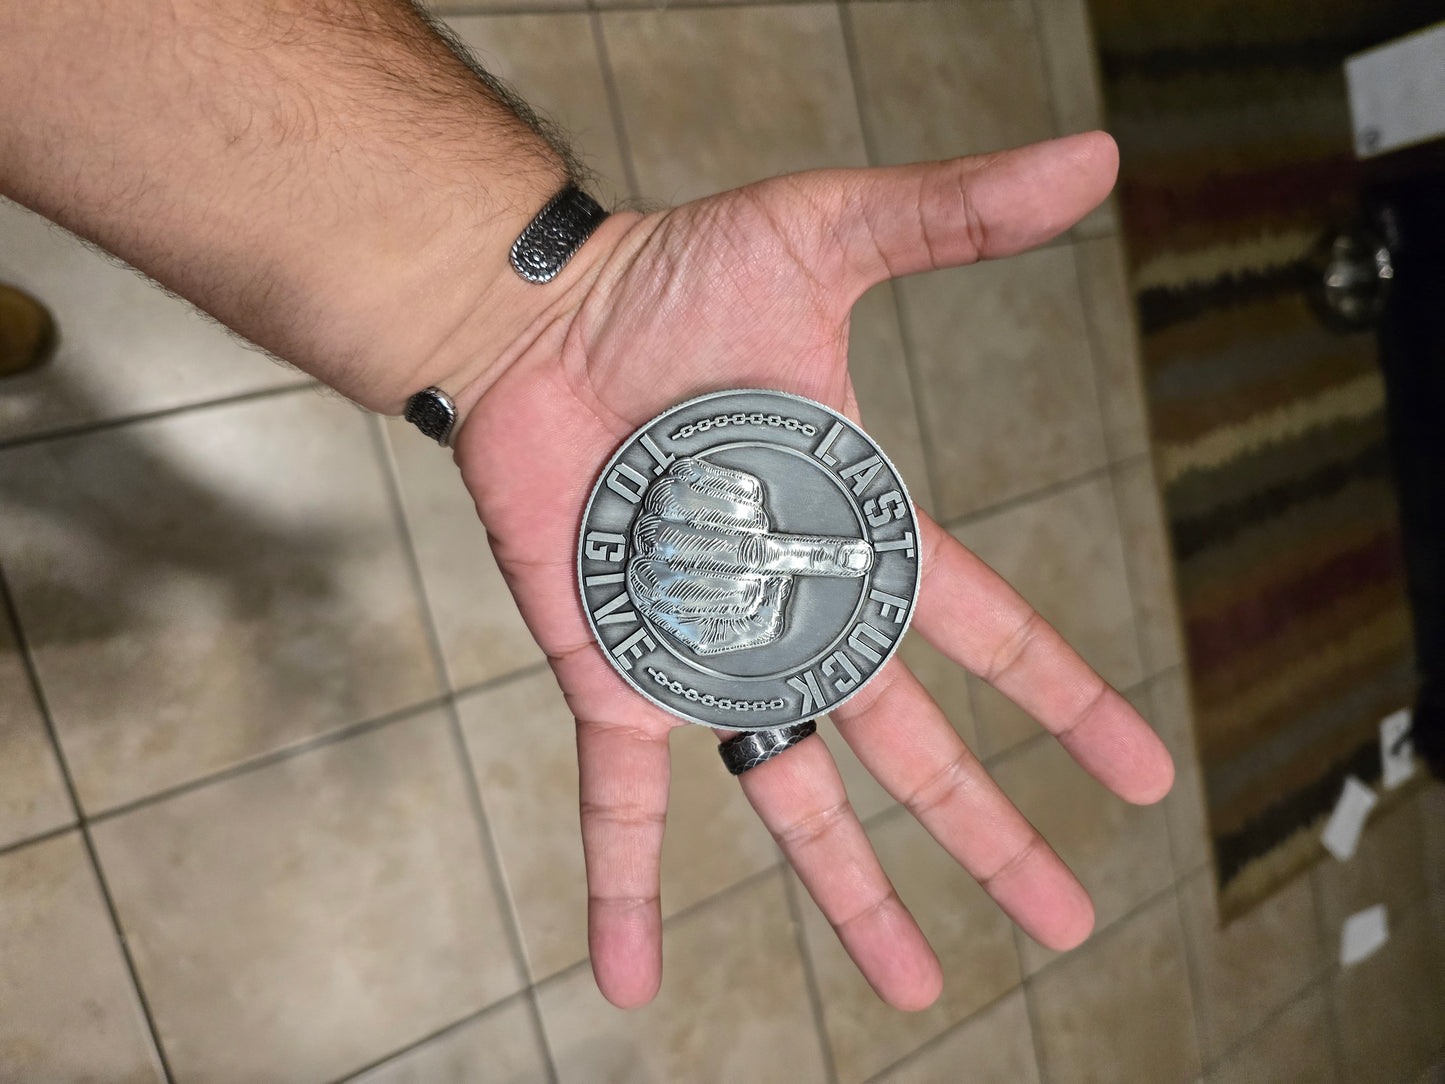 Last F@#$ to Give Challenge Coin